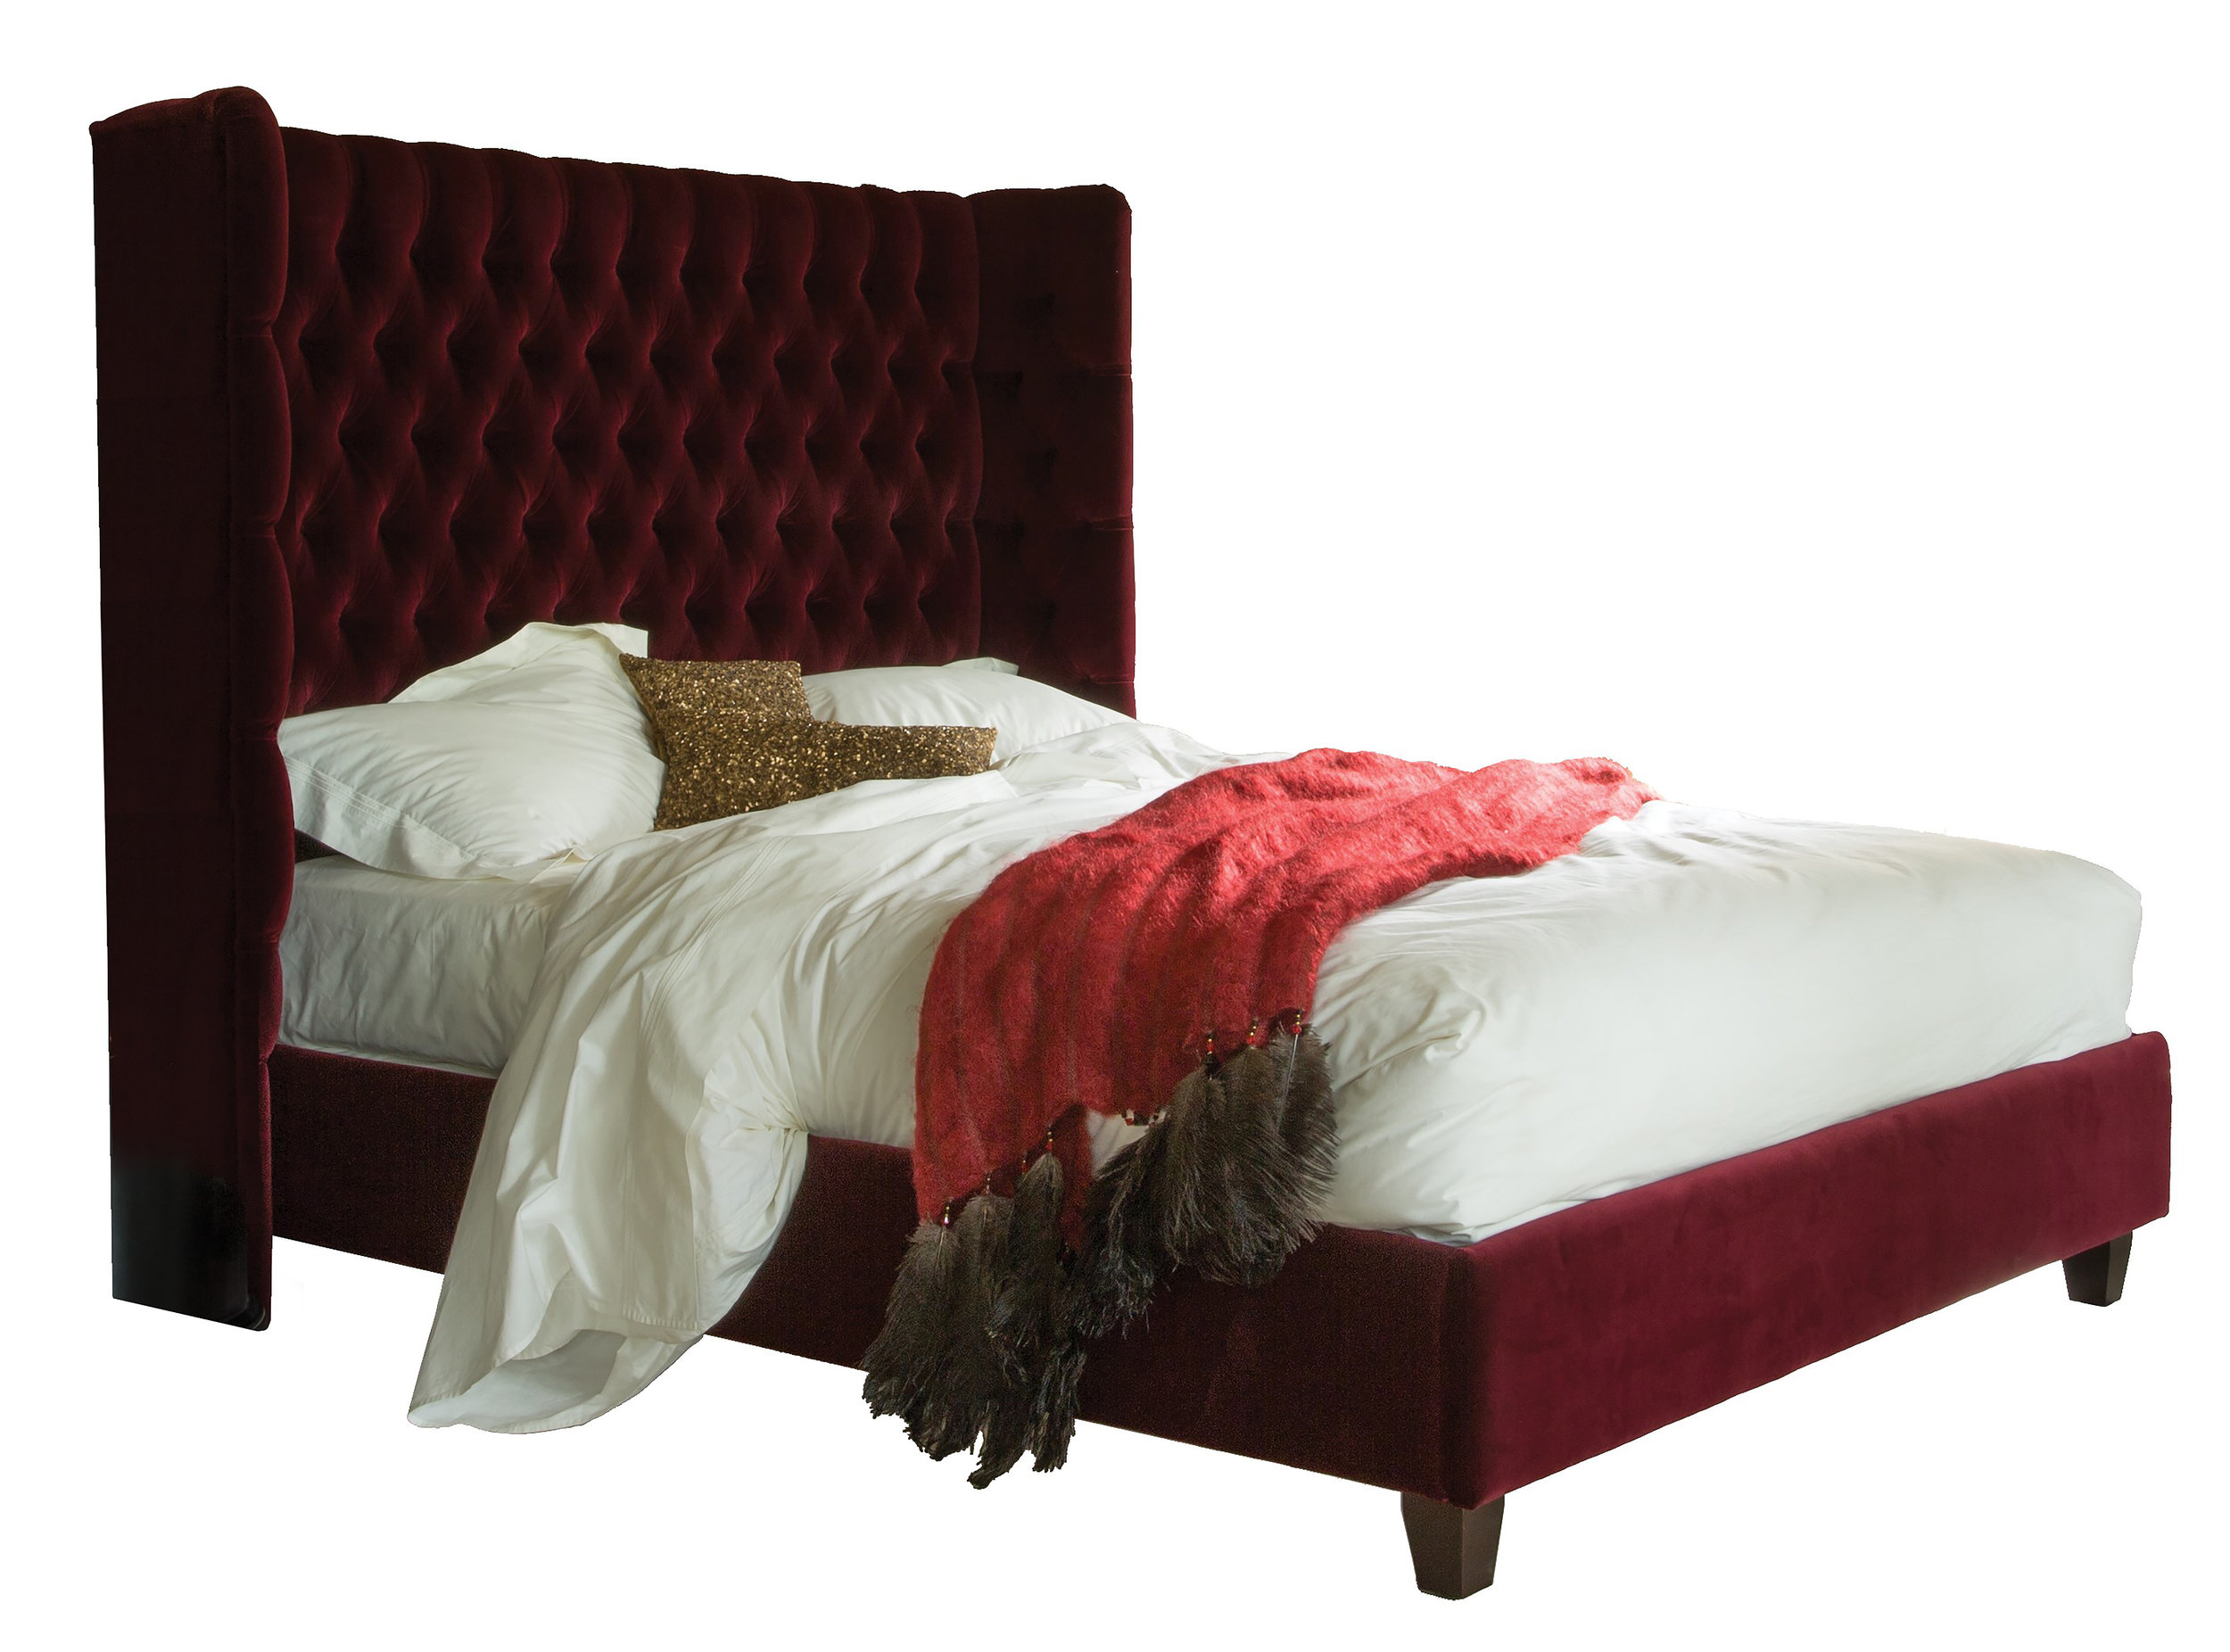   http://www.andsotobed.co.uk/beds/traditional-upholstered/contemporary-upholstered/emilia-wing-bed.html  